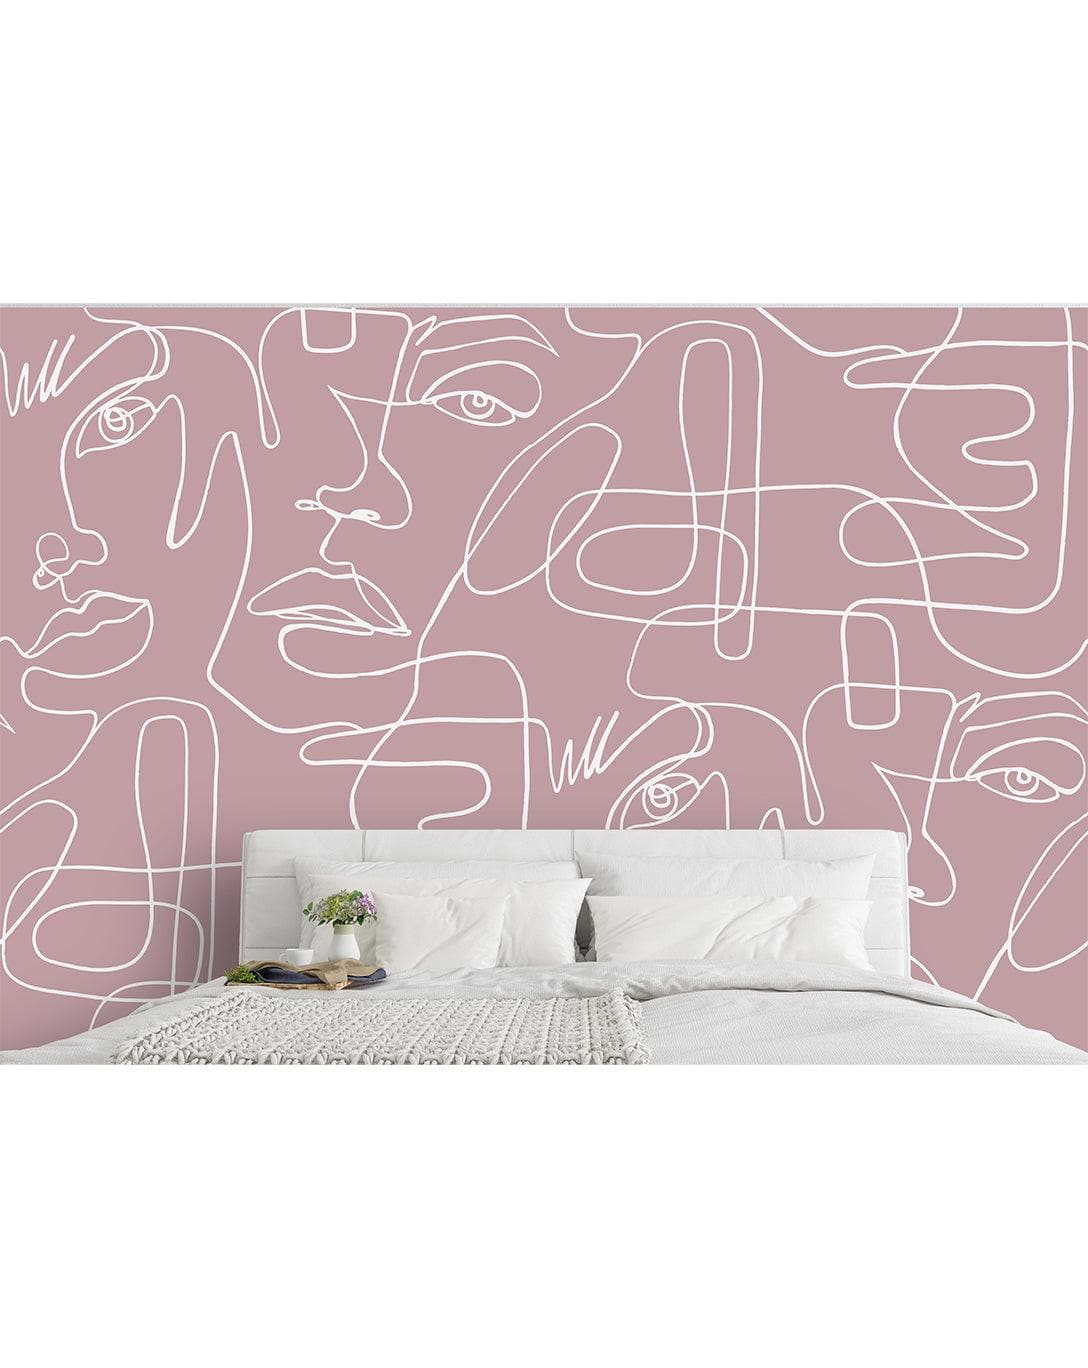 Abstract Female Faces Pink Line Art Beauty Studio Wall Mural Abstract Female Faces Pink Line Art Beauty Studio Wall Mural 